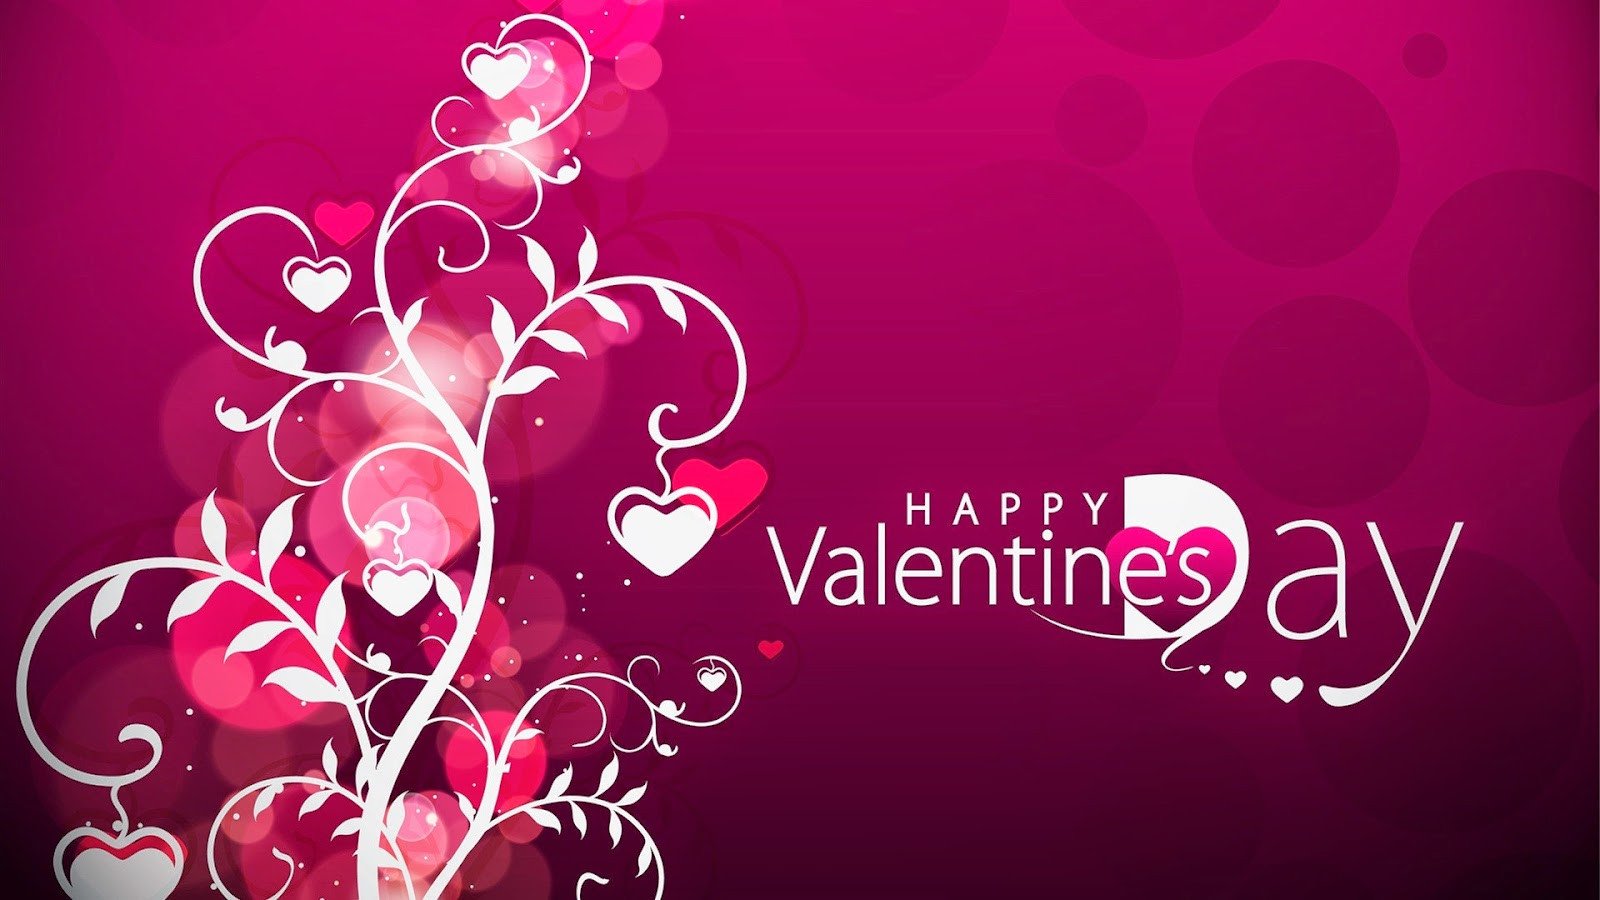 Happy Valentines Day Wallpaper 15 New Valentine S Day Desktop Wallpapers for 2015 Brand